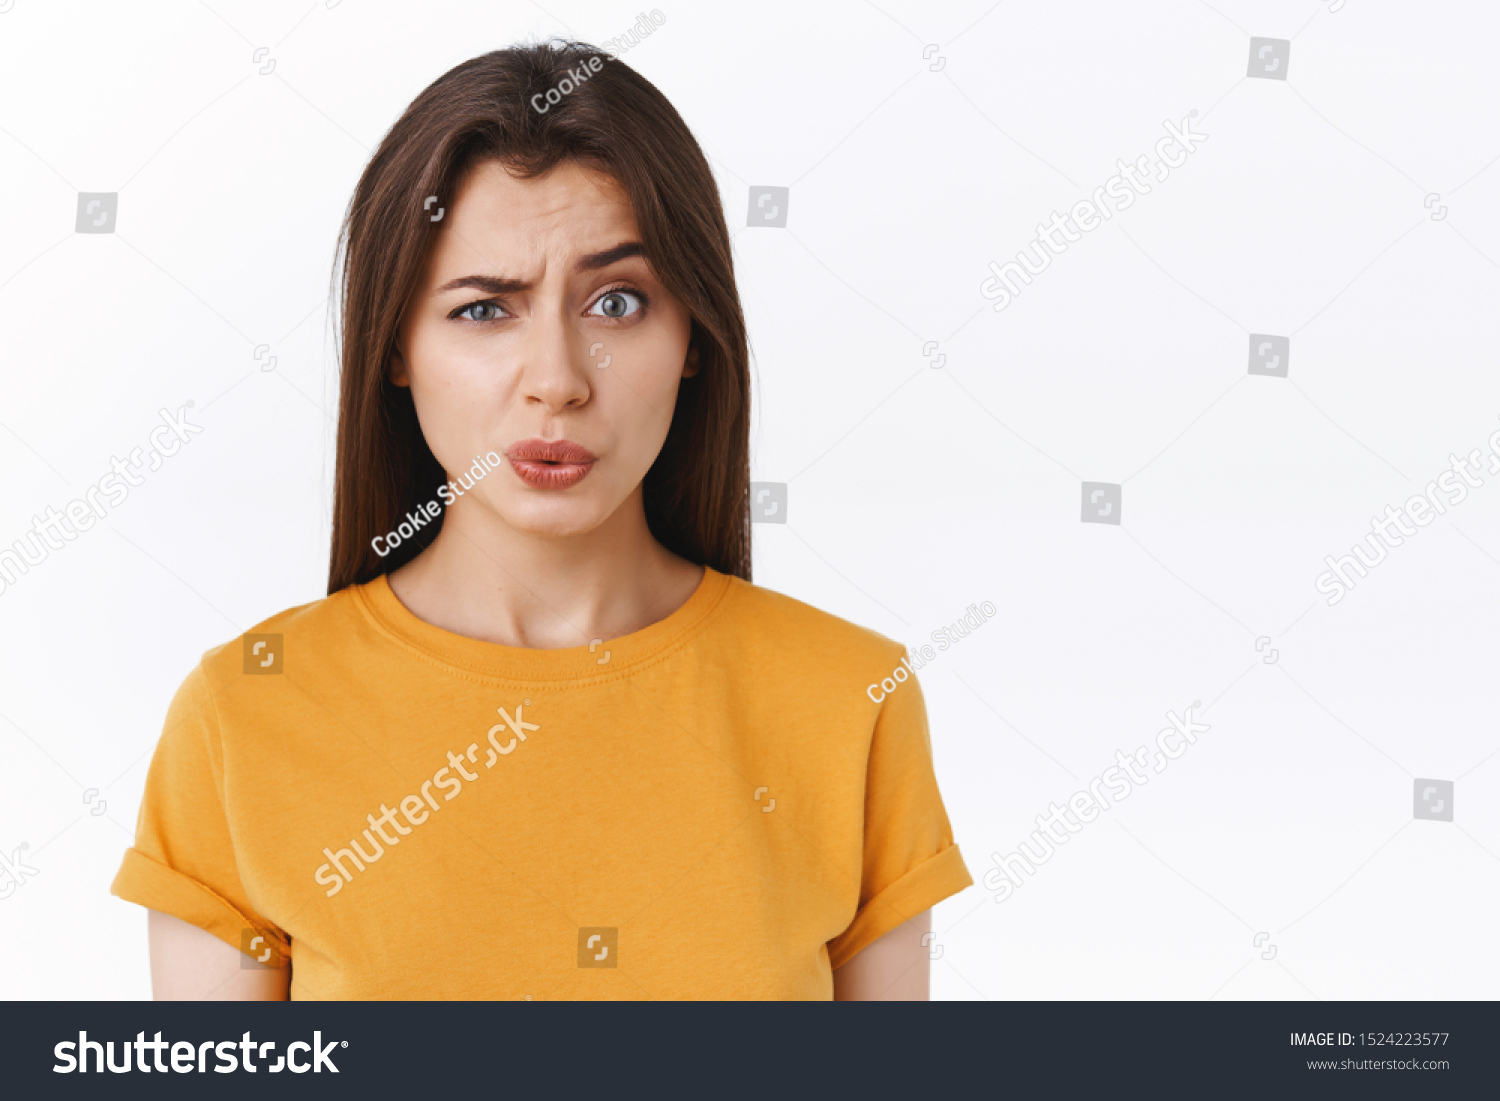 Ouch it probably hurts. Pity good-looking modern brunette woman in yellow t-shirt cringe and grimace as seeing someone got punched in face, folding lips and look uneasy camera, white background #1524223577